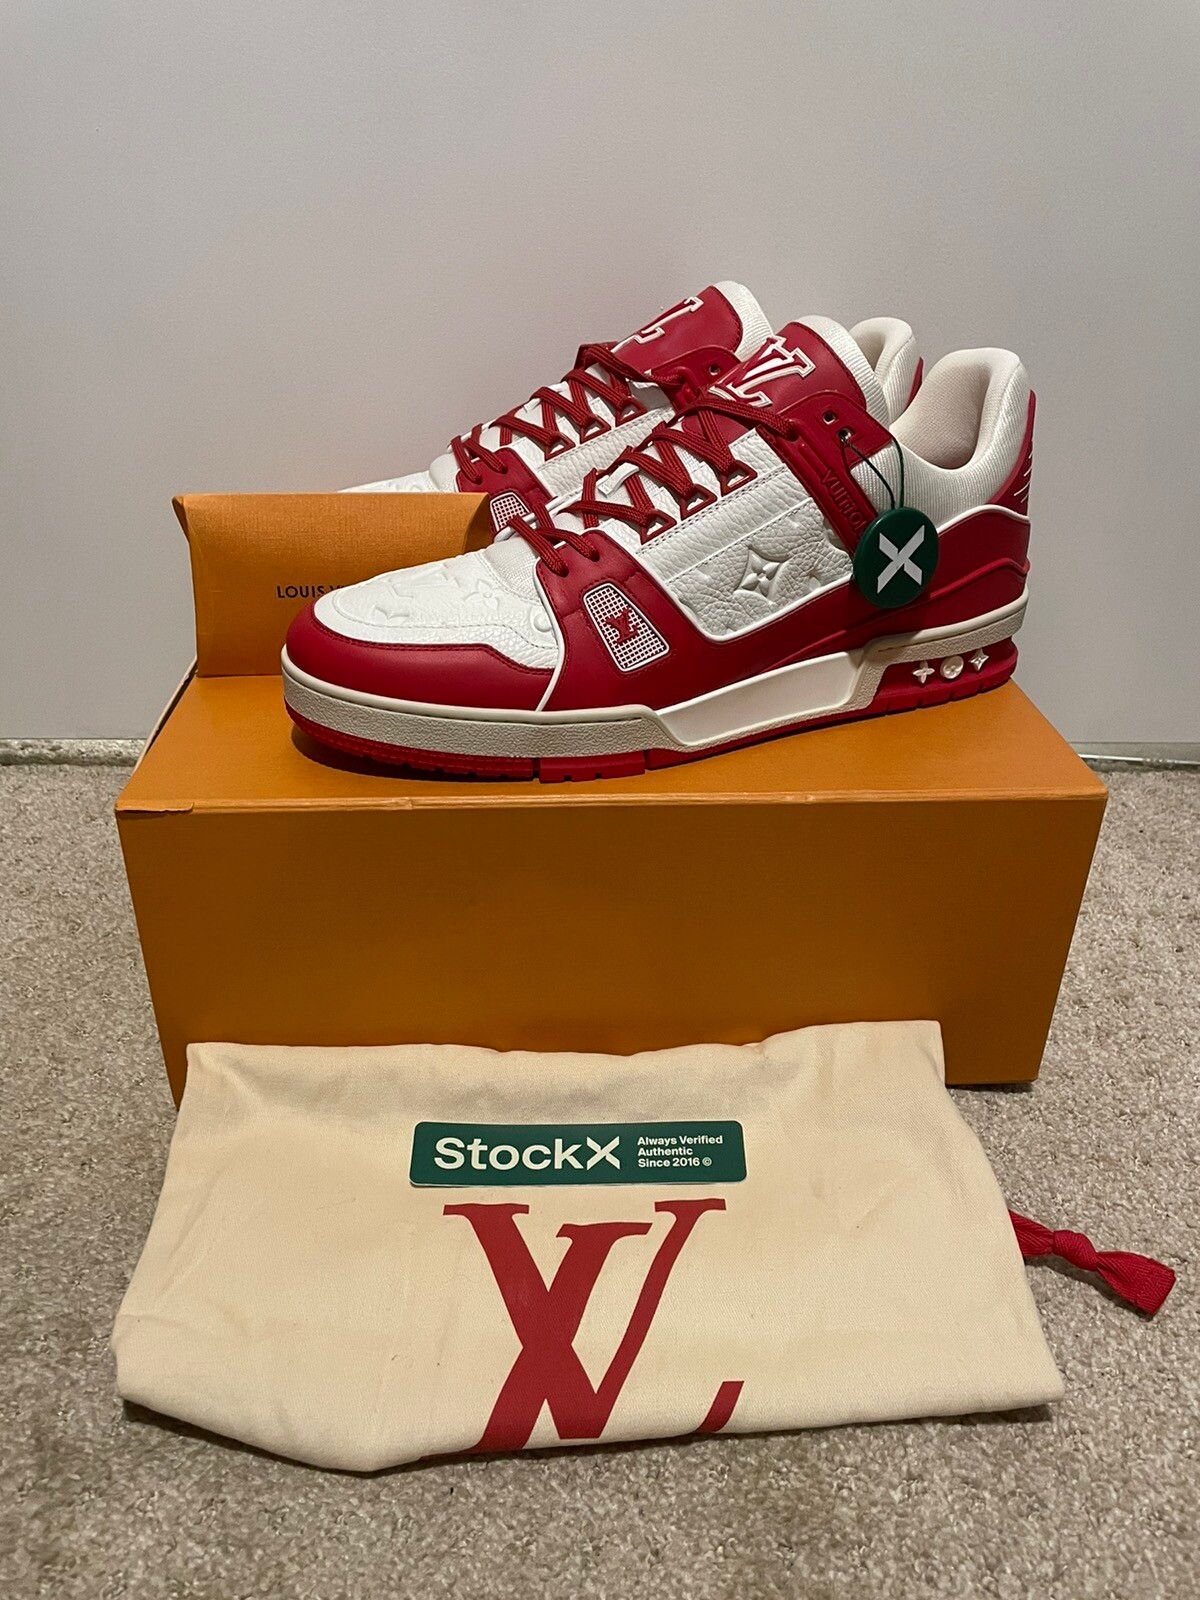 Louis Vuitton Trainer Red White Size 44 for Sale in Brentwood, NY